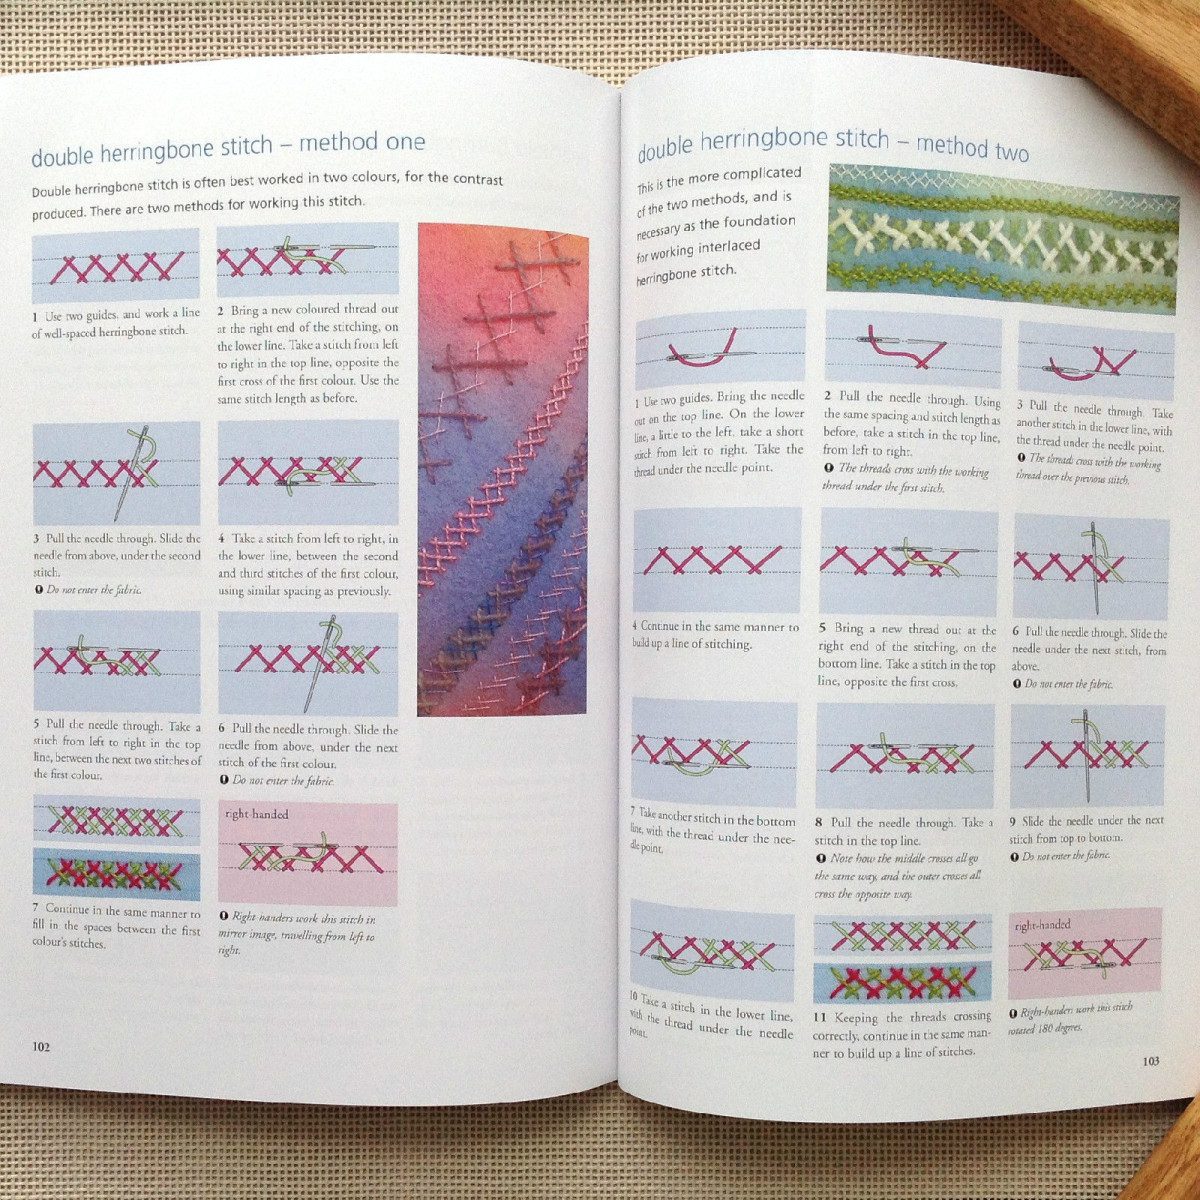 Embroidery Reference Book Right-Handed Embroiderer/'s Companion by Yvette Stanton